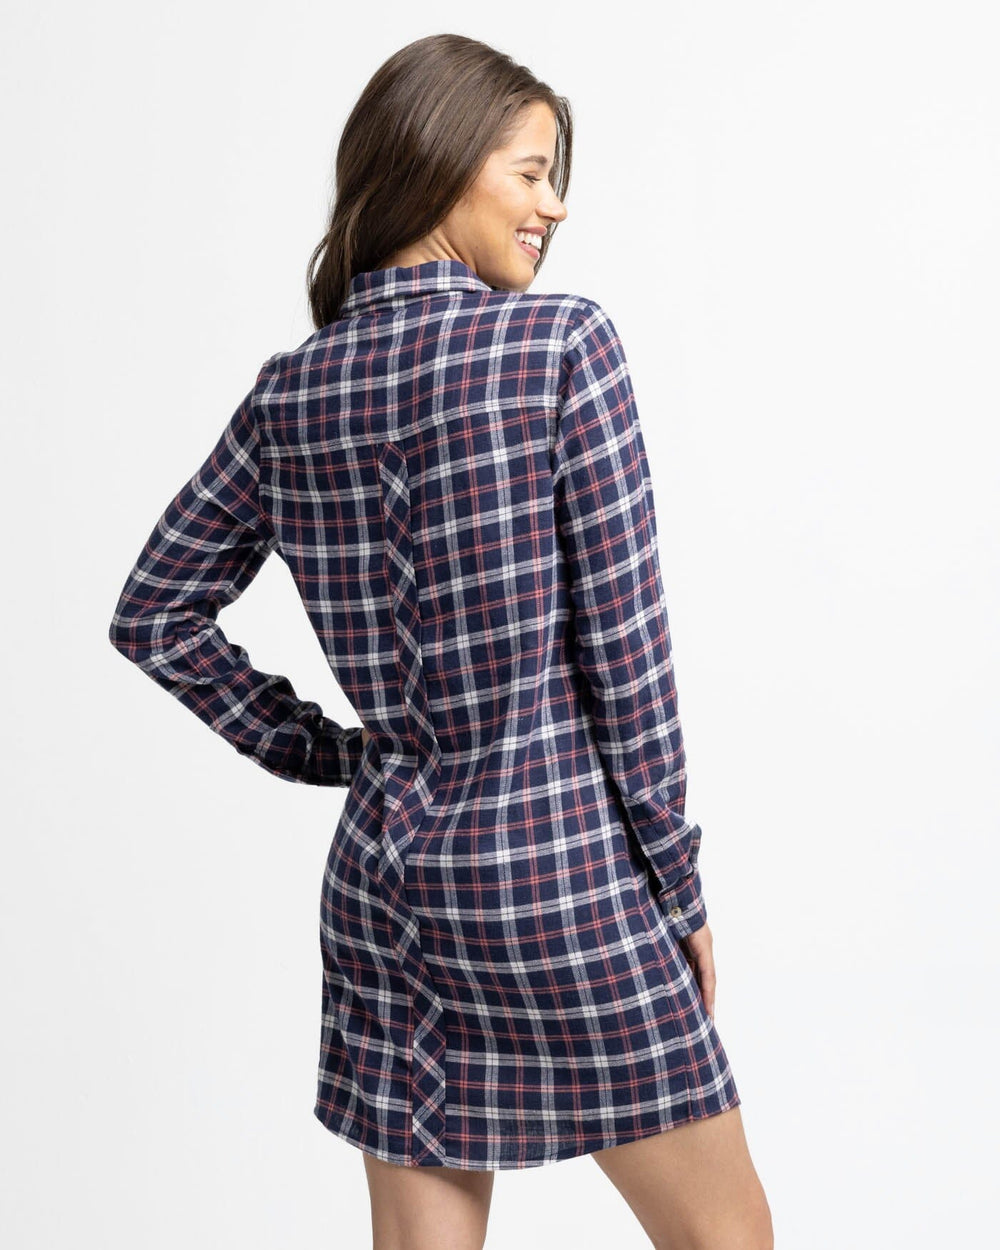 The back view of the Southern Tide Kamryn Chilly Morning Dress by Southern Tide - Nautical Navy